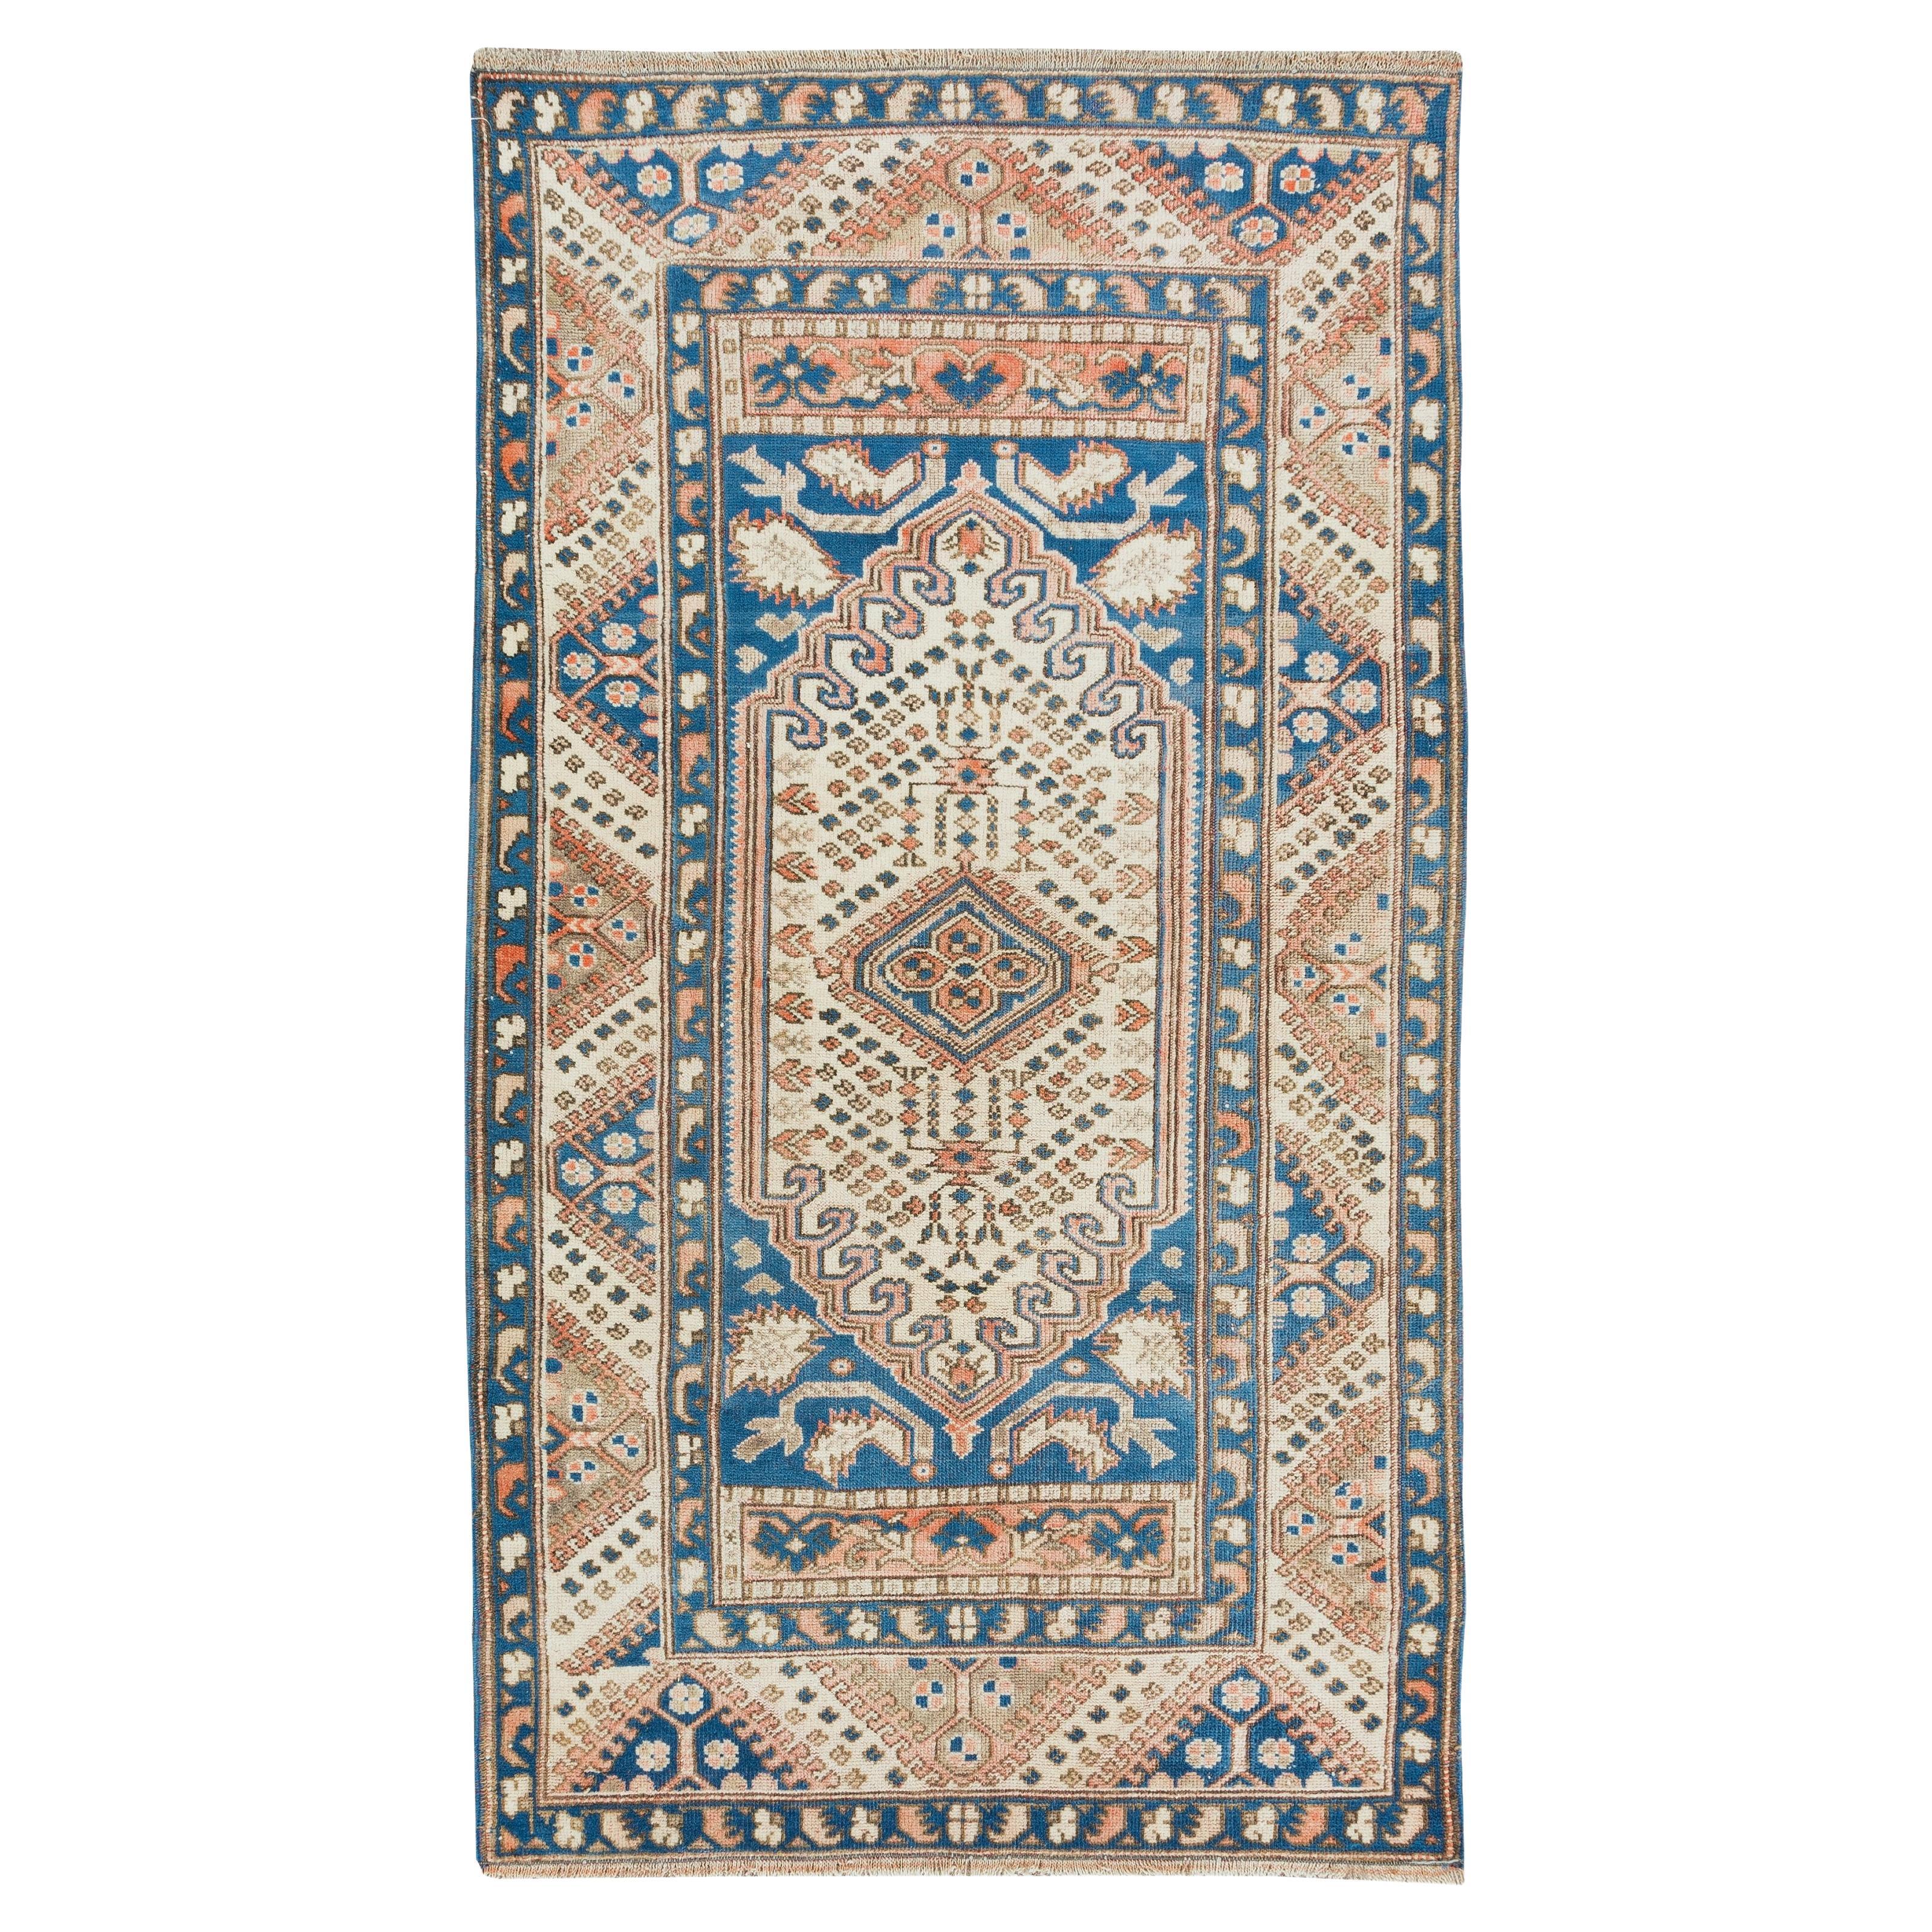 3.4x6.3 Ft Traditional Geometric Turkish Accent Rug. Tapis vintage fait main